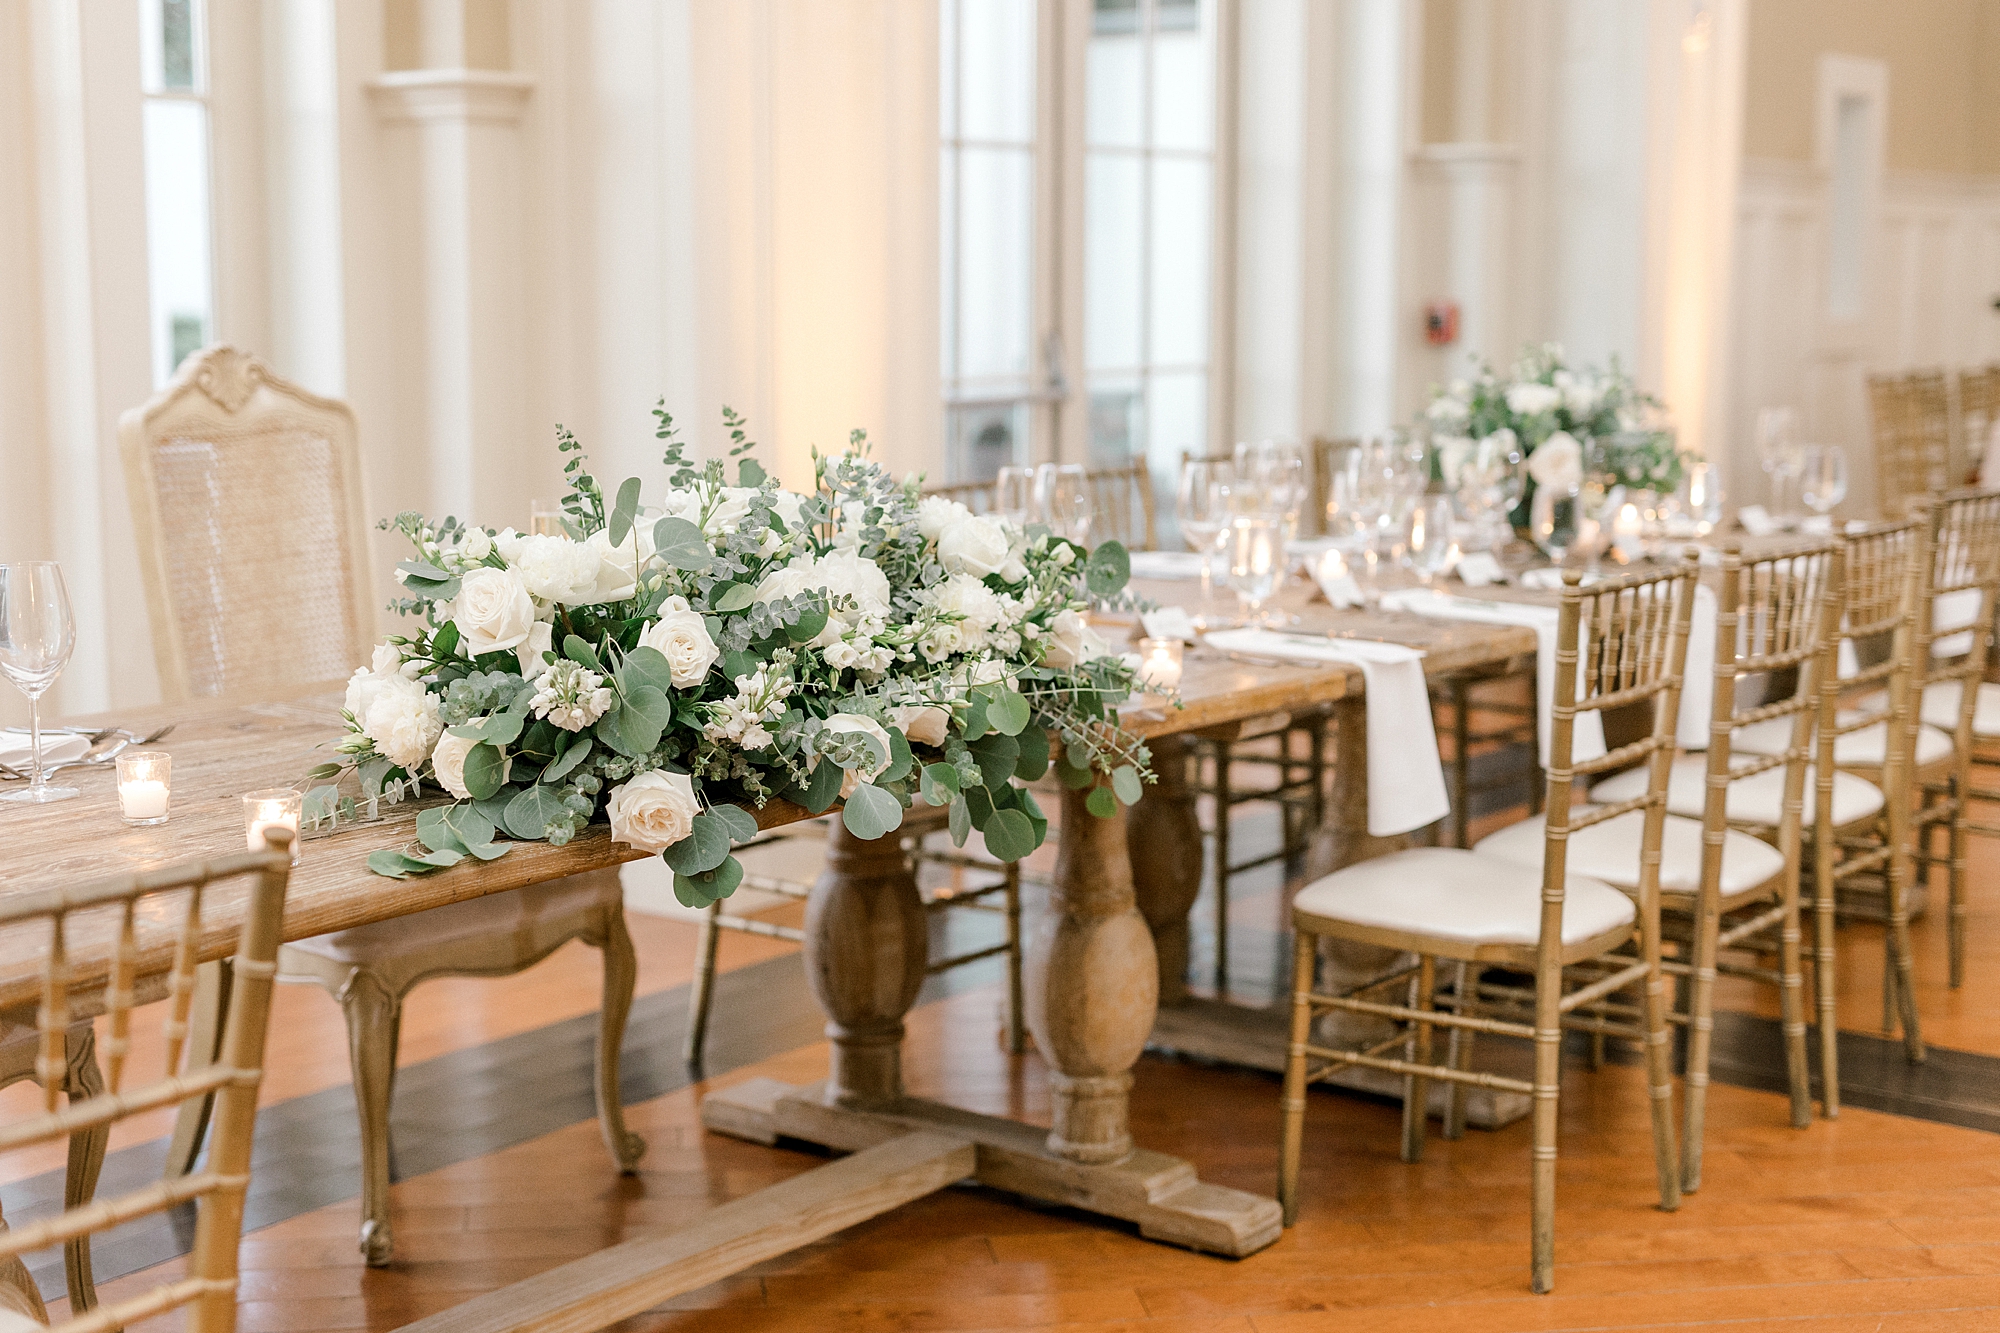 wooden tables with white rose centerpieces and white napkins